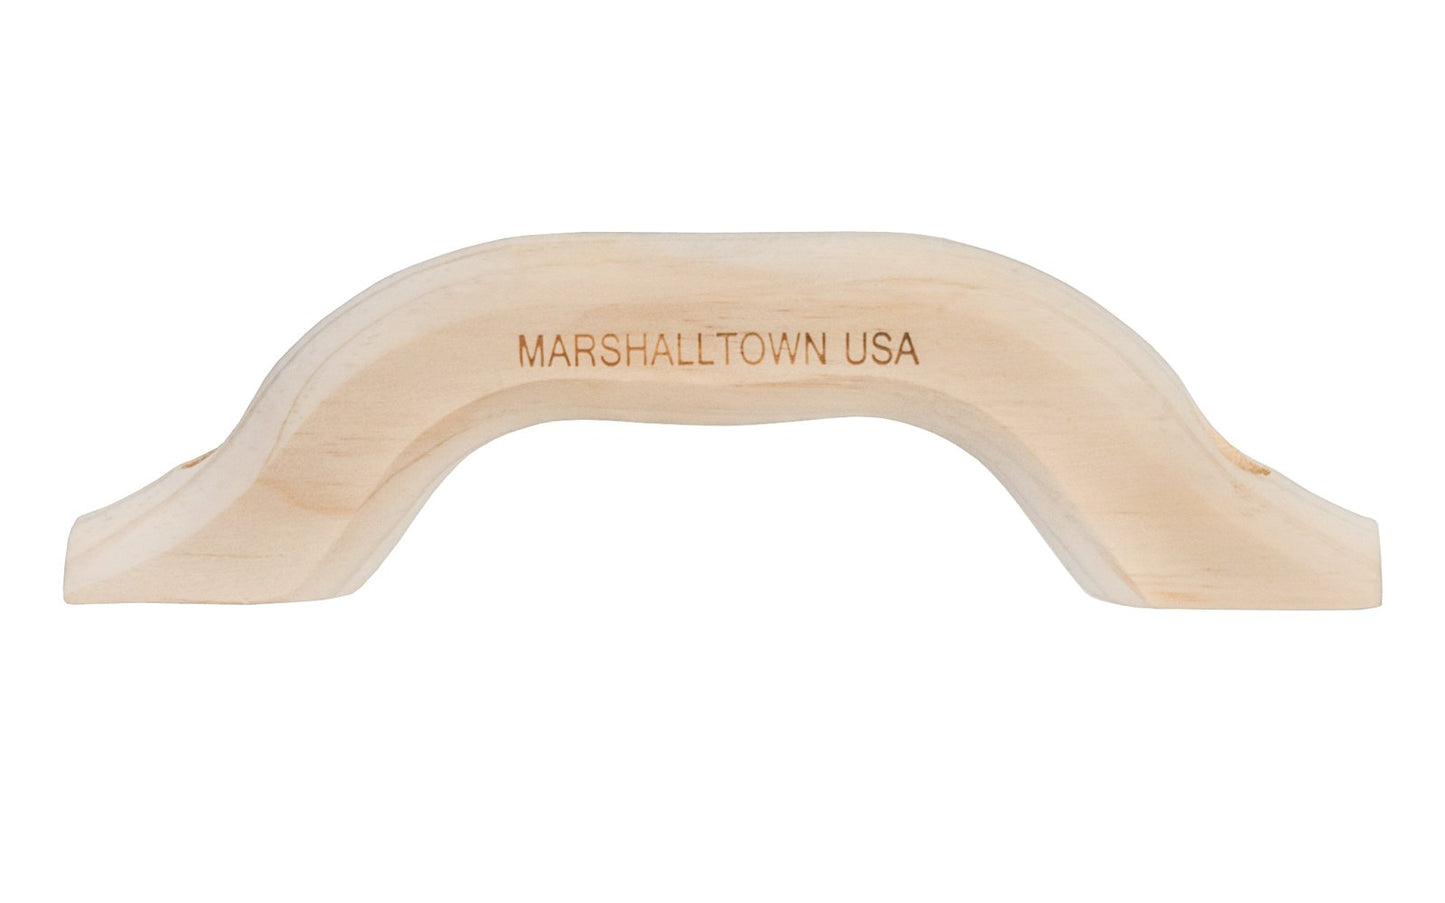 Made in USA - Marshalltown USA - The replacement Marshalltown Float Handles fit all of Marshalltown magnesium hand floats. Also used as a large wooden handle for other applications - 6-7/8" space of screw holes - Model No. 16M - 035965091121 - Large Wooden Handle - Wooden Barn Door Handle - Wood handle - Float Handle - 16M